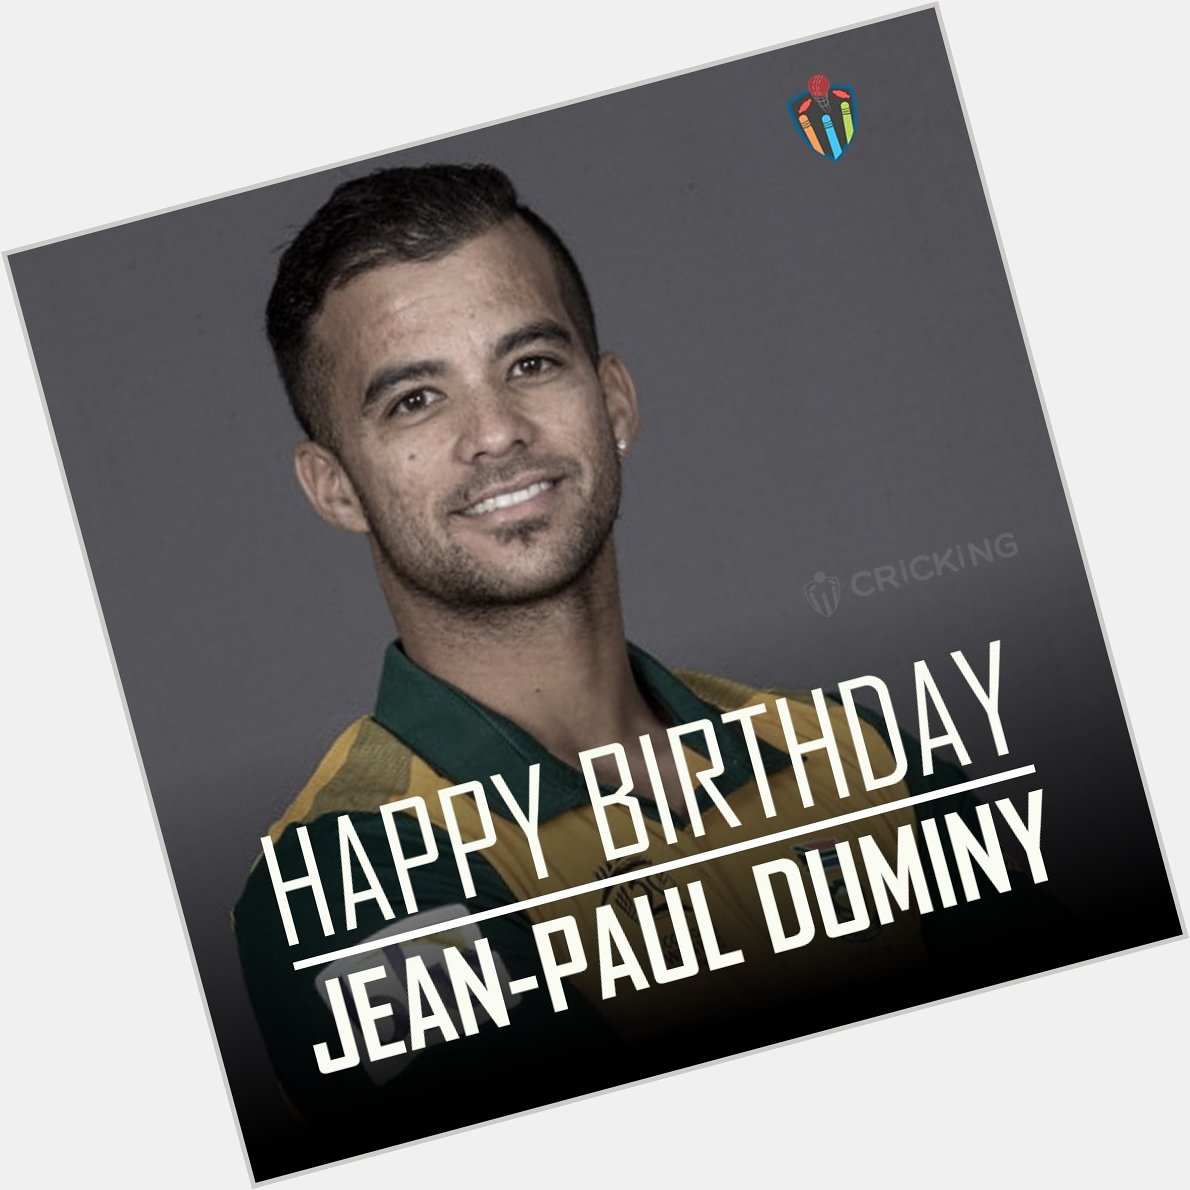 Happy Birthday JP Duminy. The South African cricketer turns 33 today. 